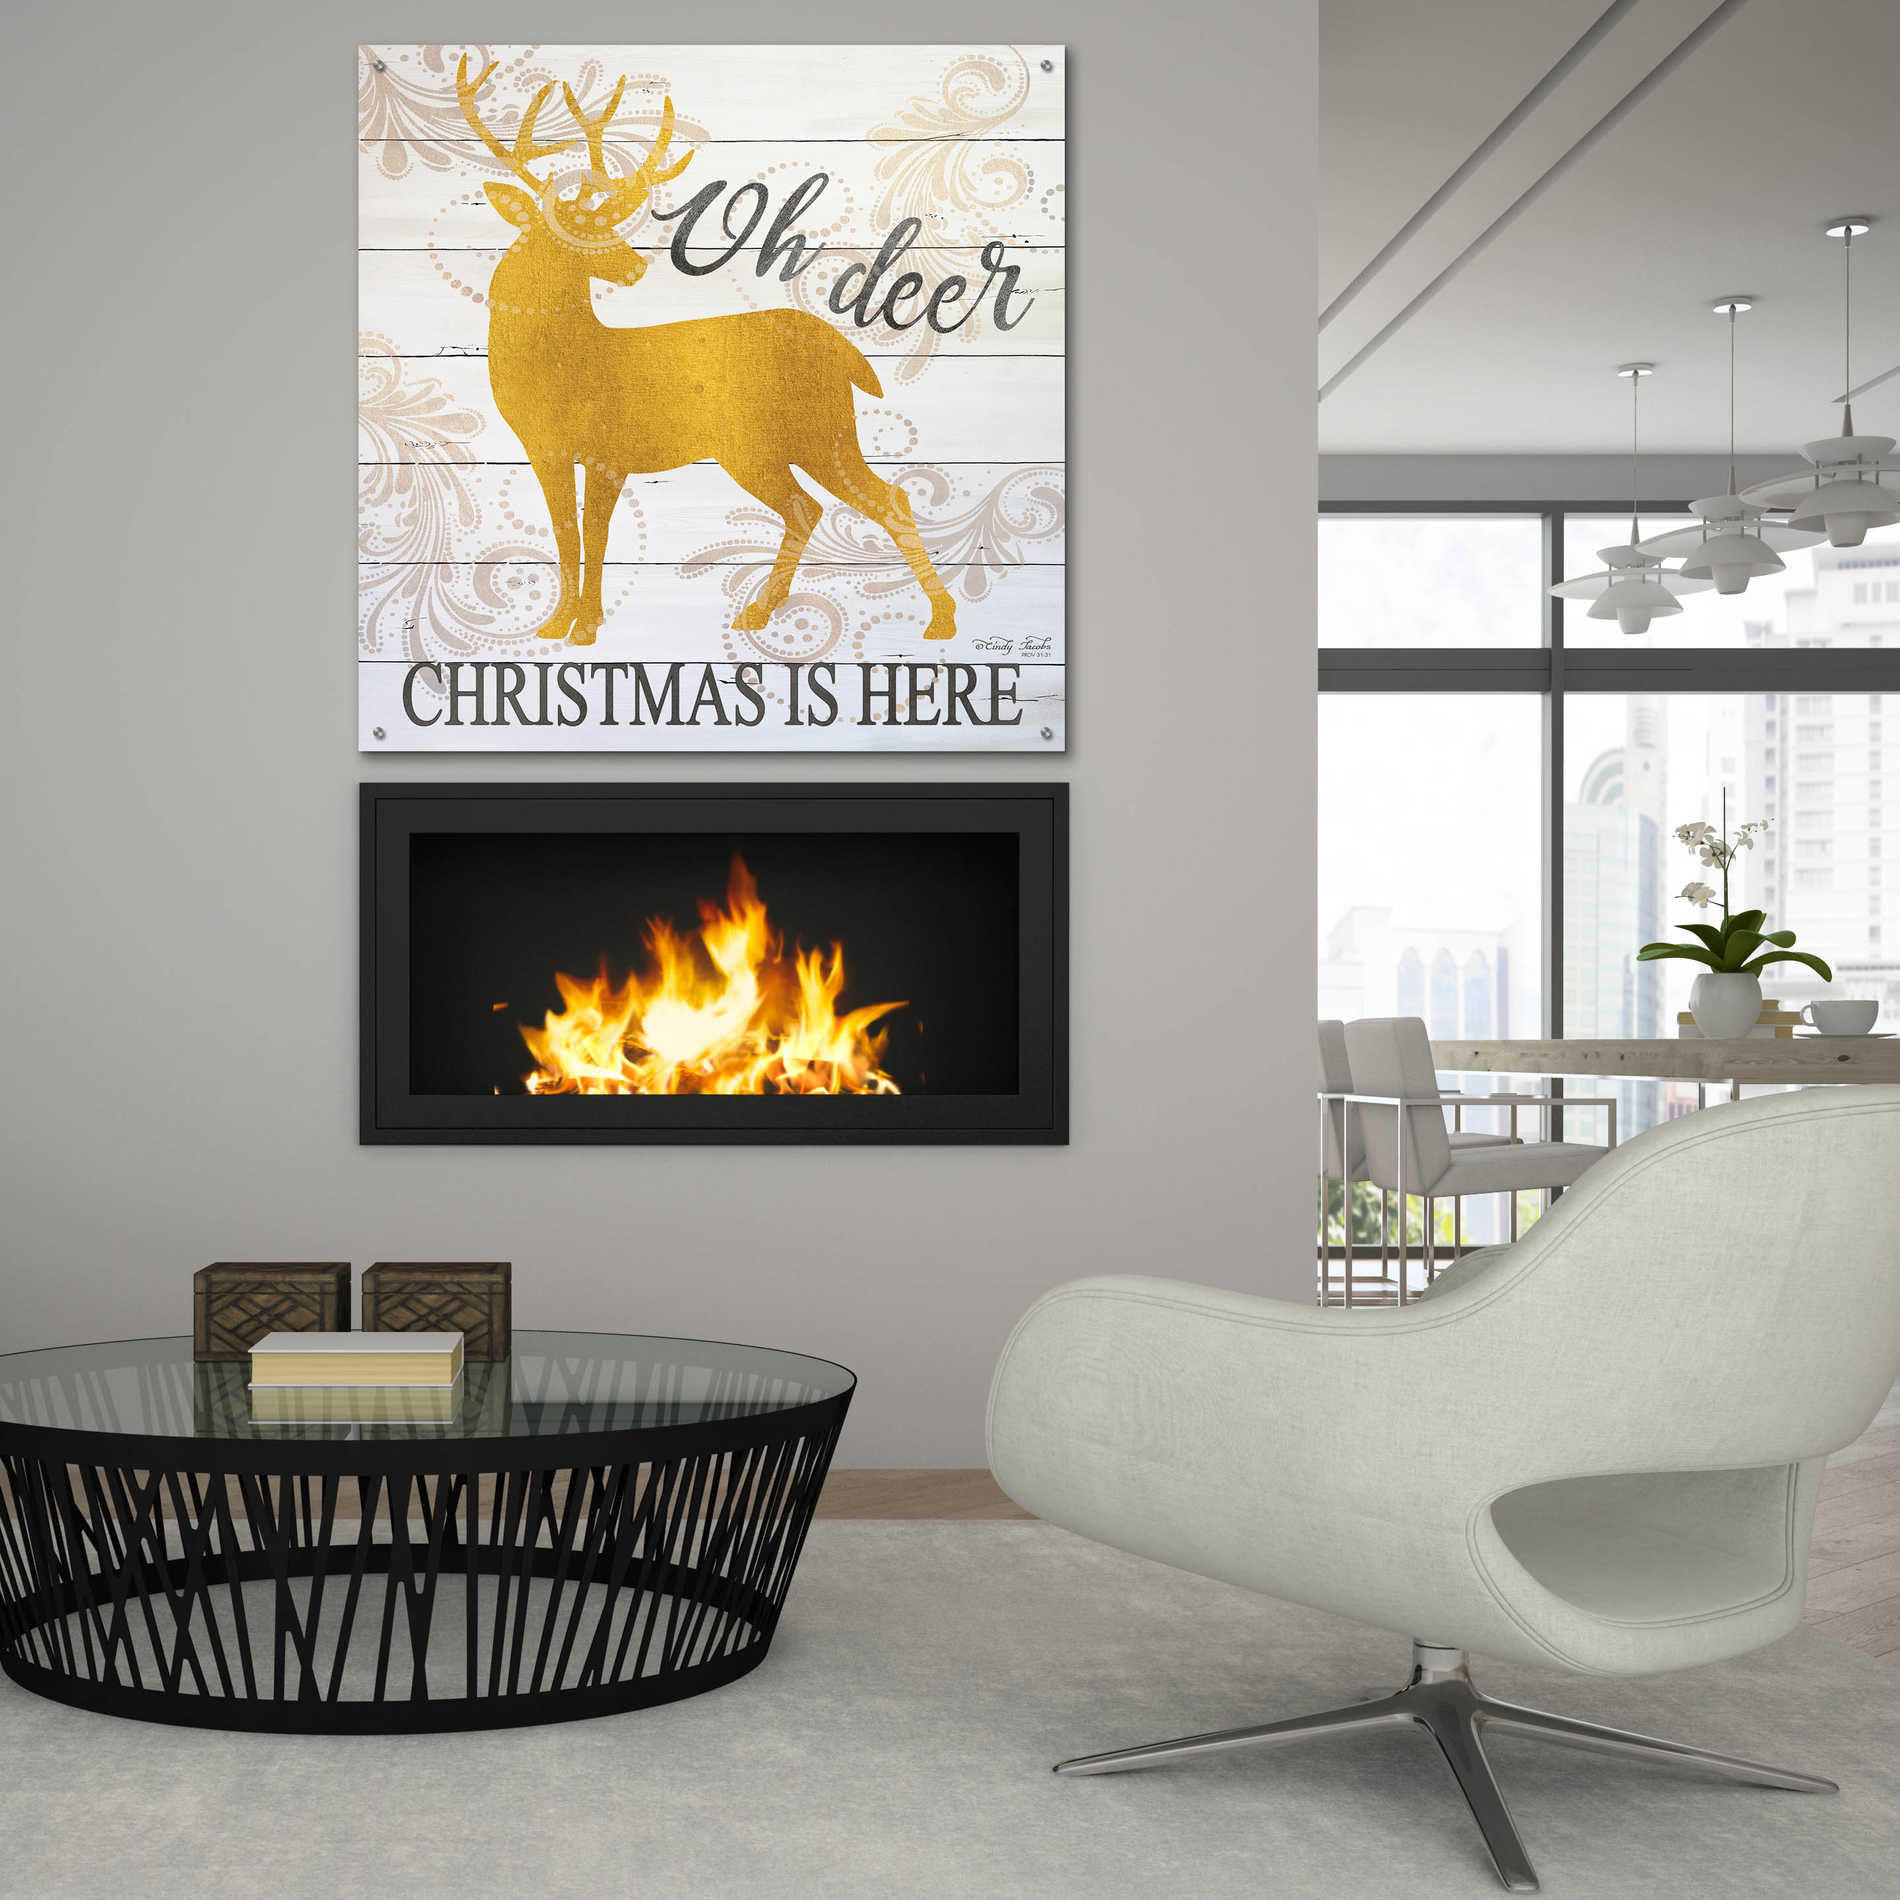 Epic Art 'Oh Deer Christmas is Here' by Cindy Jacobs, Acrylic Glass Wall Art,36x36